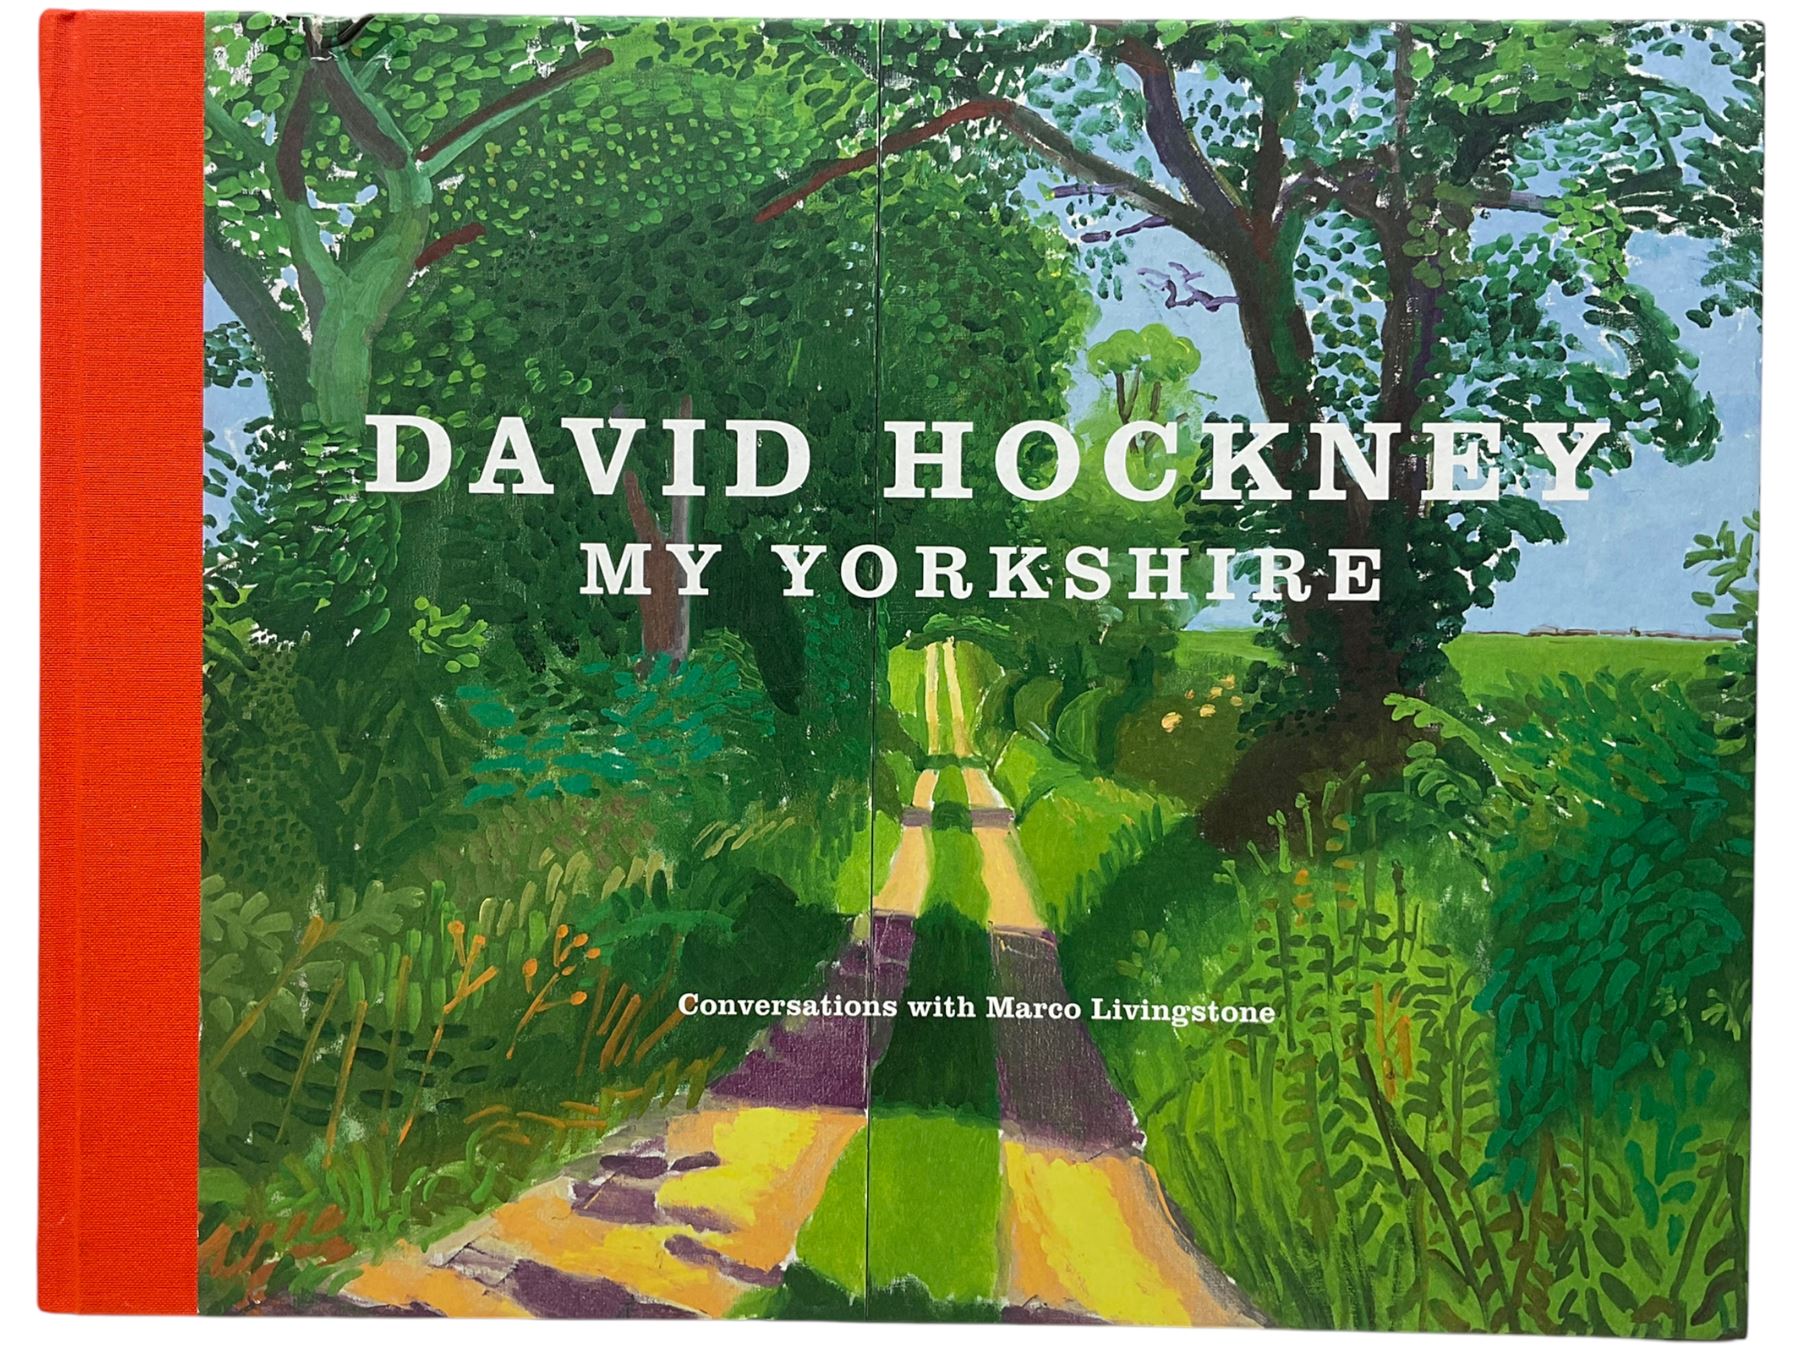 David Hockney (British 1937-) - 'My Yorkshire - Conversations with Marco Livingstone' and 'Dog Days' - Image 3 of 9